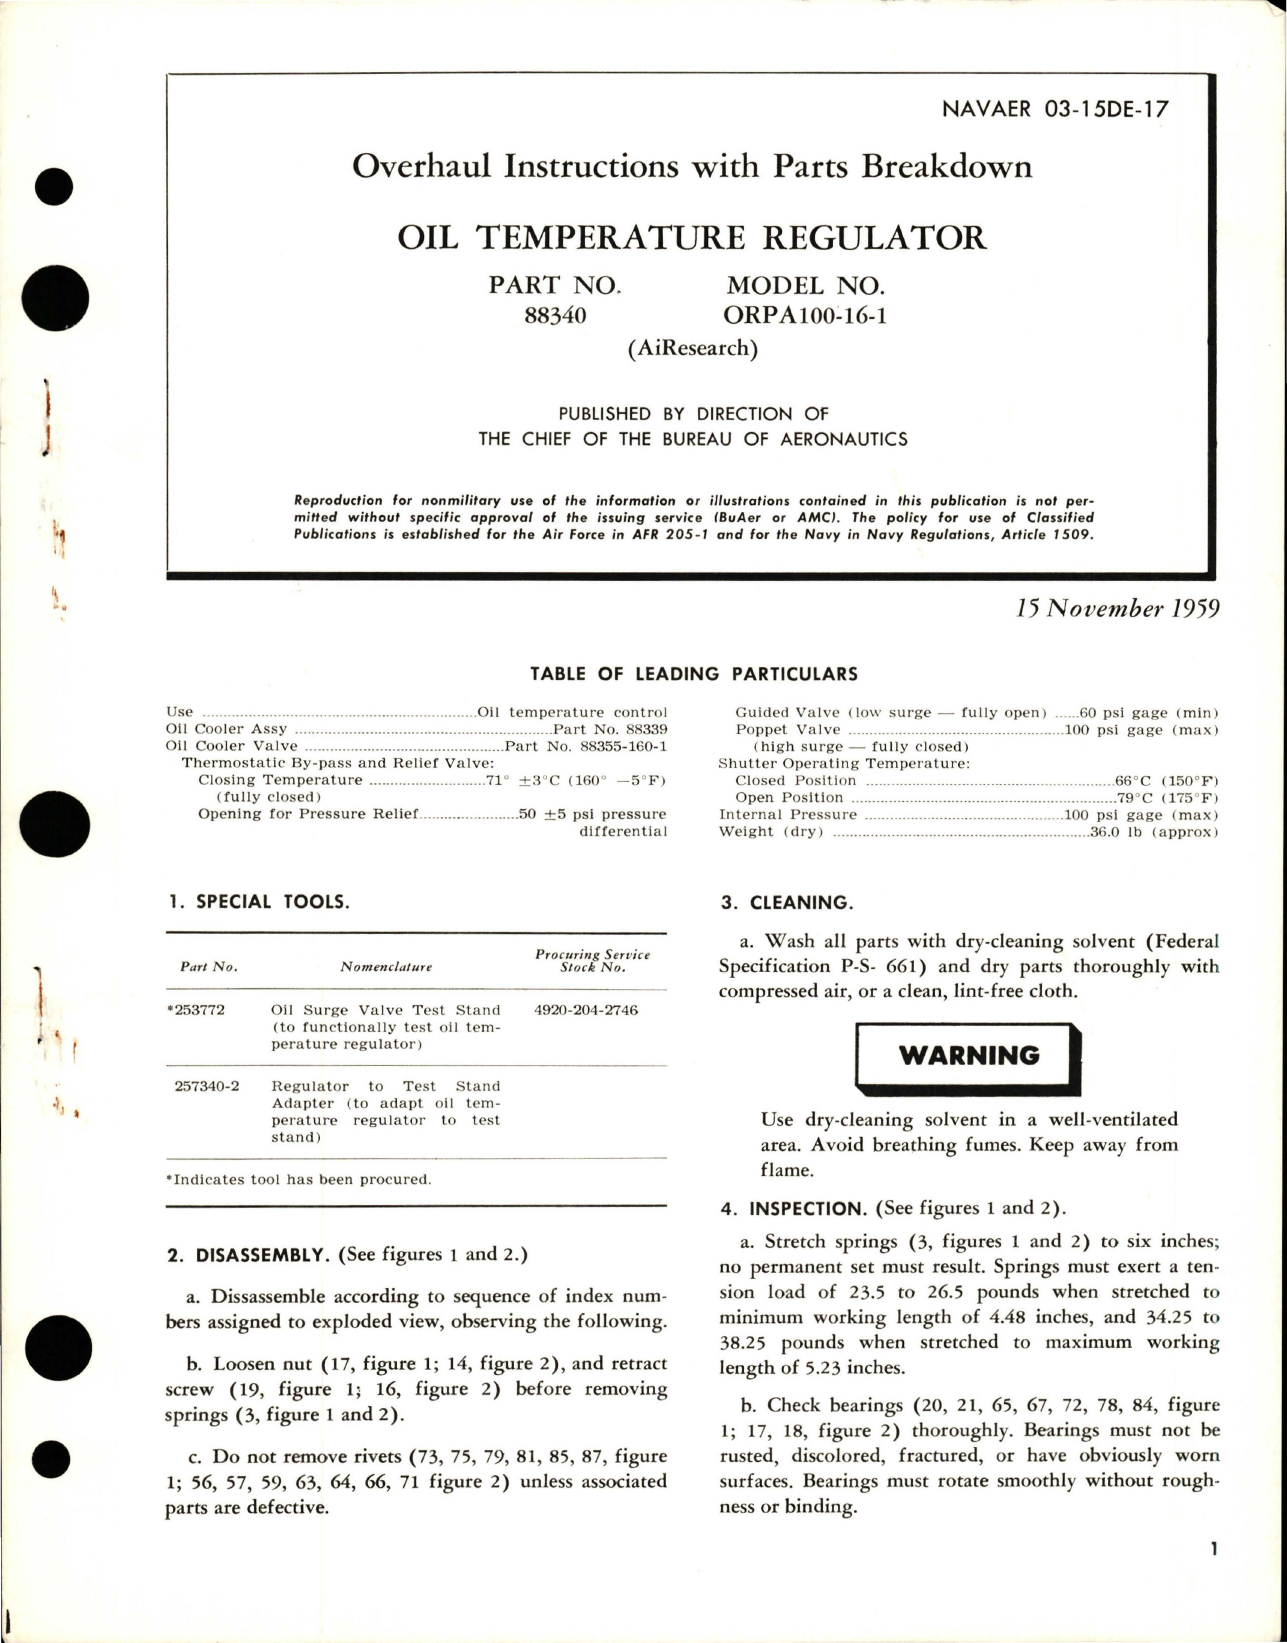 Sample page 1 from AirCorps Library document: Overhaul Instructions with Parts Breakdown for Oil Temperature Regulator - Part 88340 - Model ORPA100-16-1